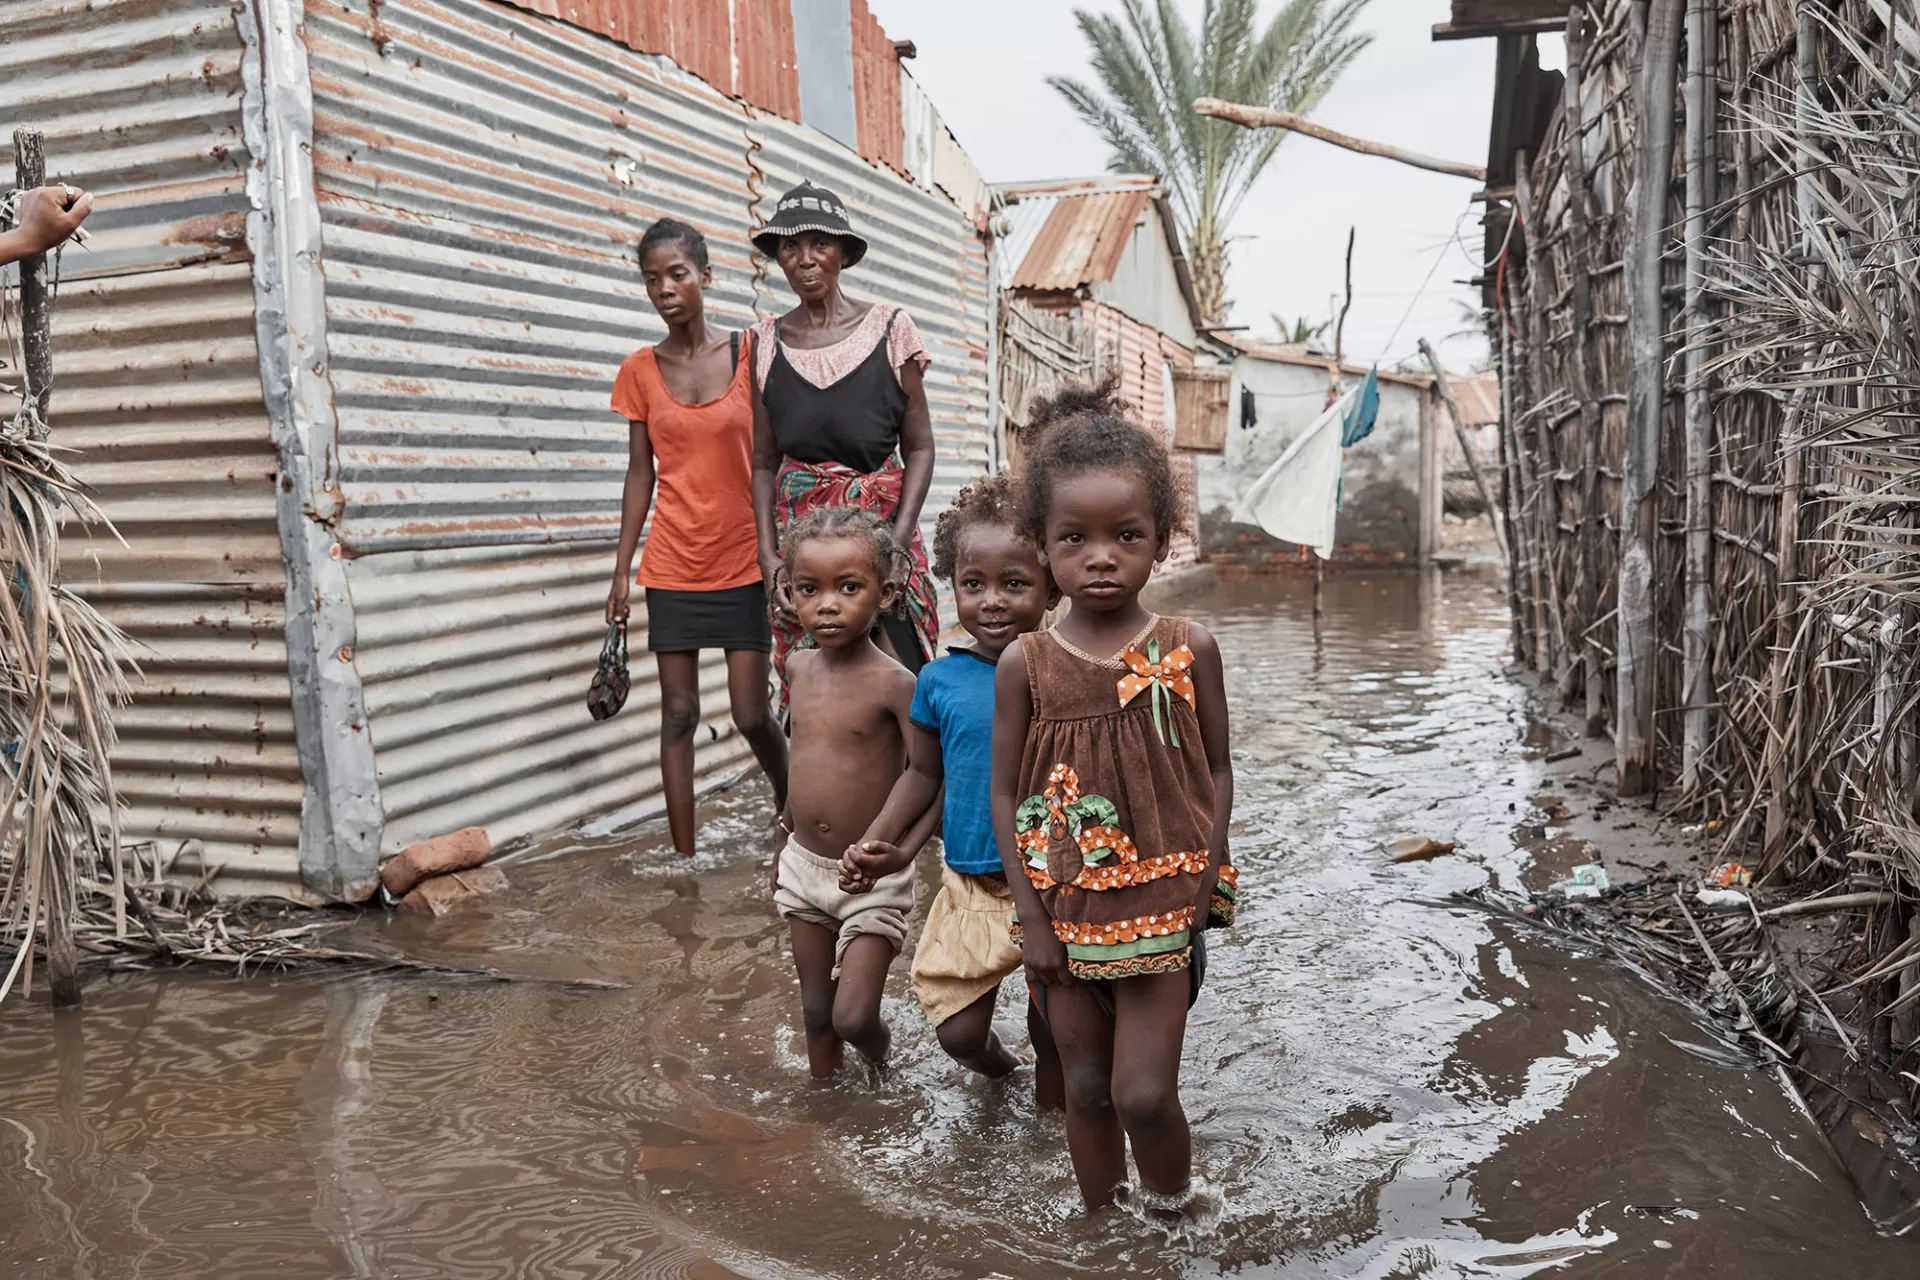 Children walking in the streets of a completely flooded neighborhood in Madagascar